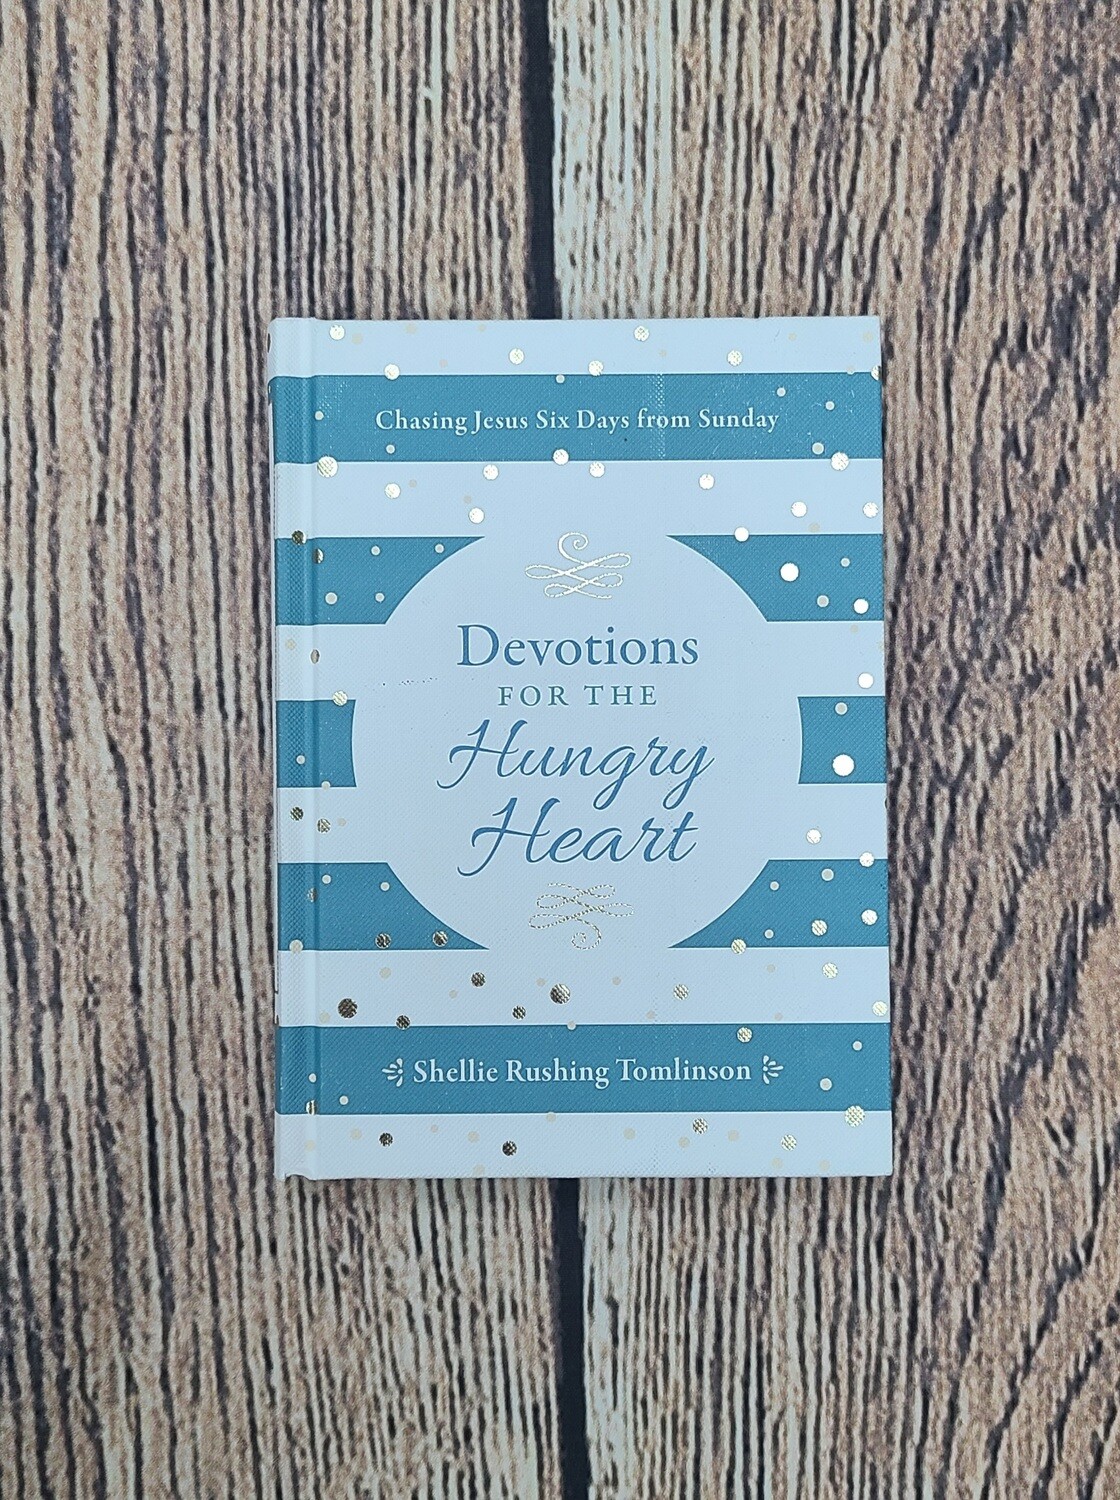 Devotions for the Hungry Heart: Chasing Jesus Six Days from Sunday by Shellie Rushing Tomlinson